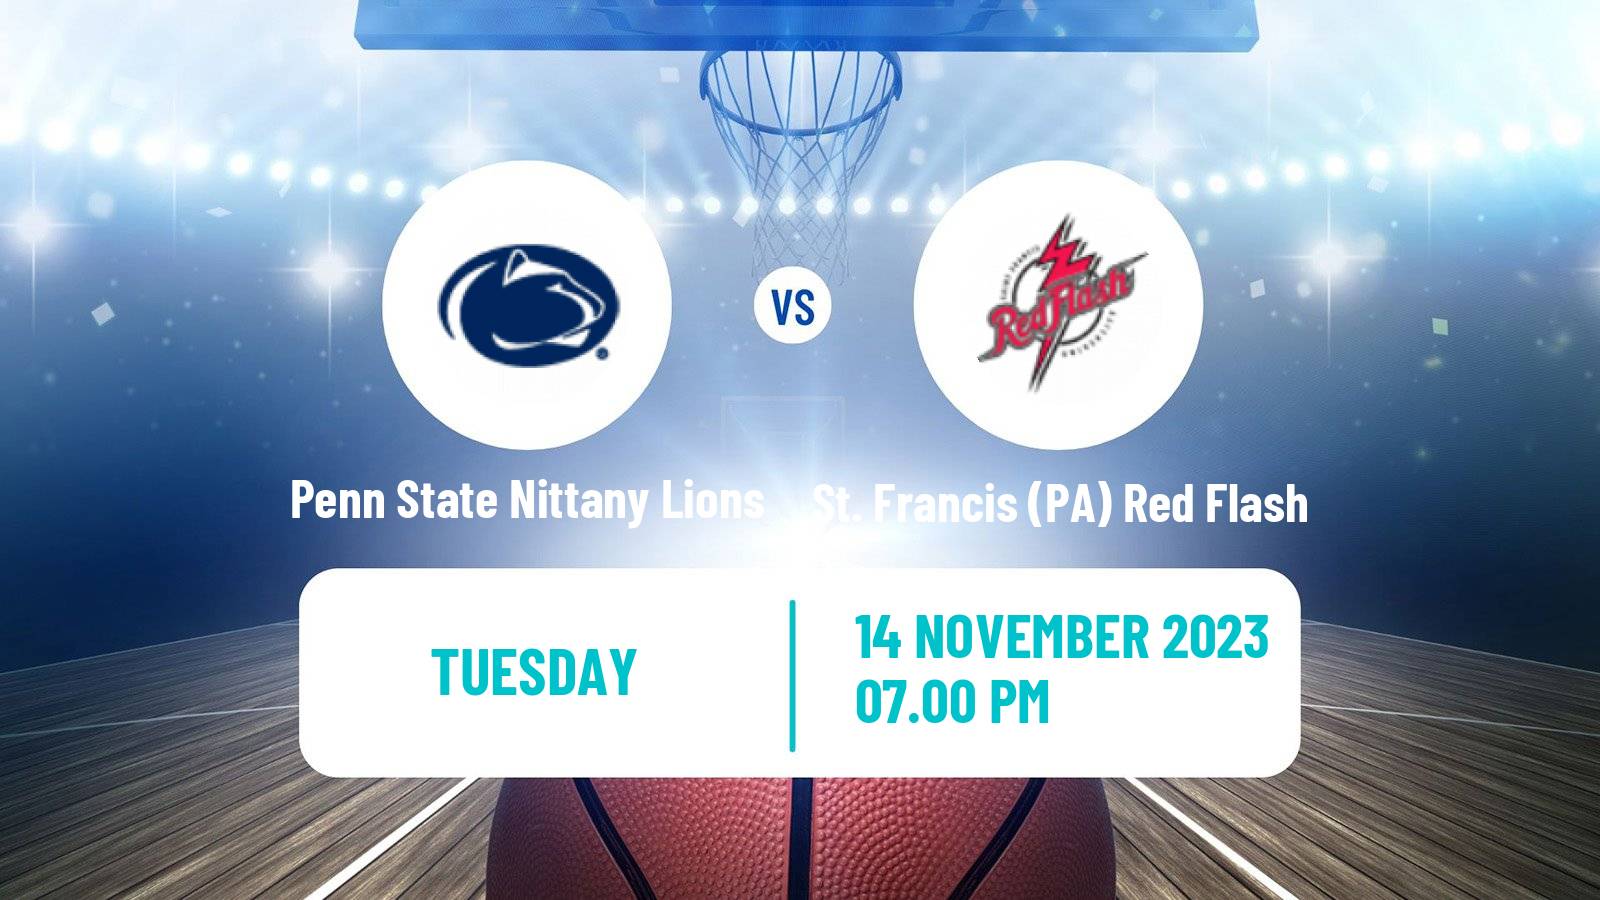 Basketball NCAA College Basketball Penn State Nittany Lions - St. Francis (PA) Red Flash